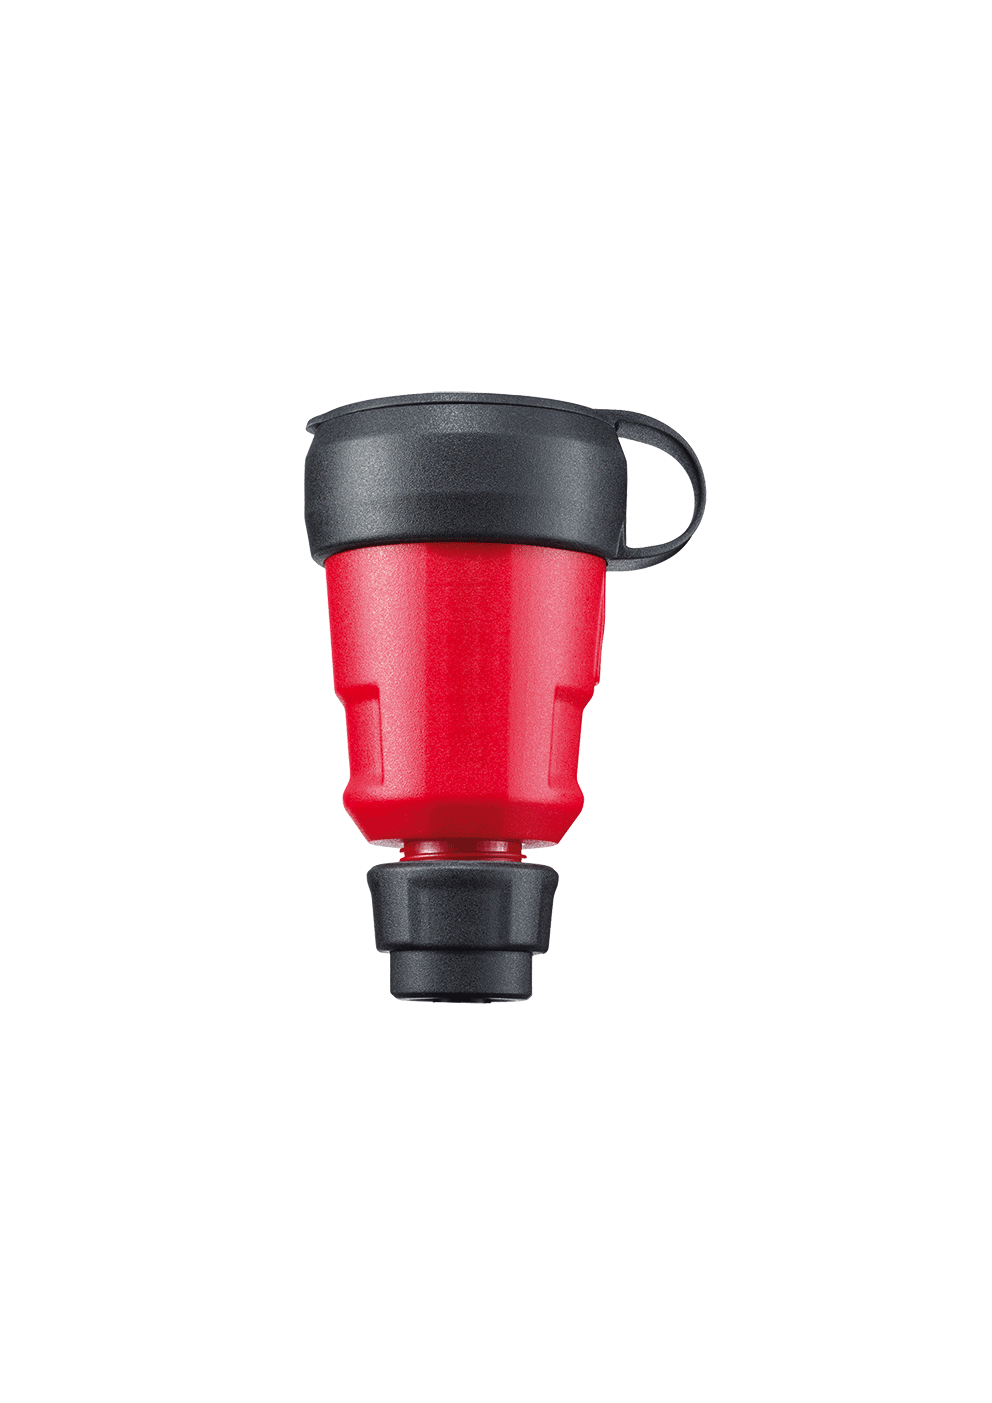 SCHUKO connector, red, Elamid high performance plastic, IP44, with lid